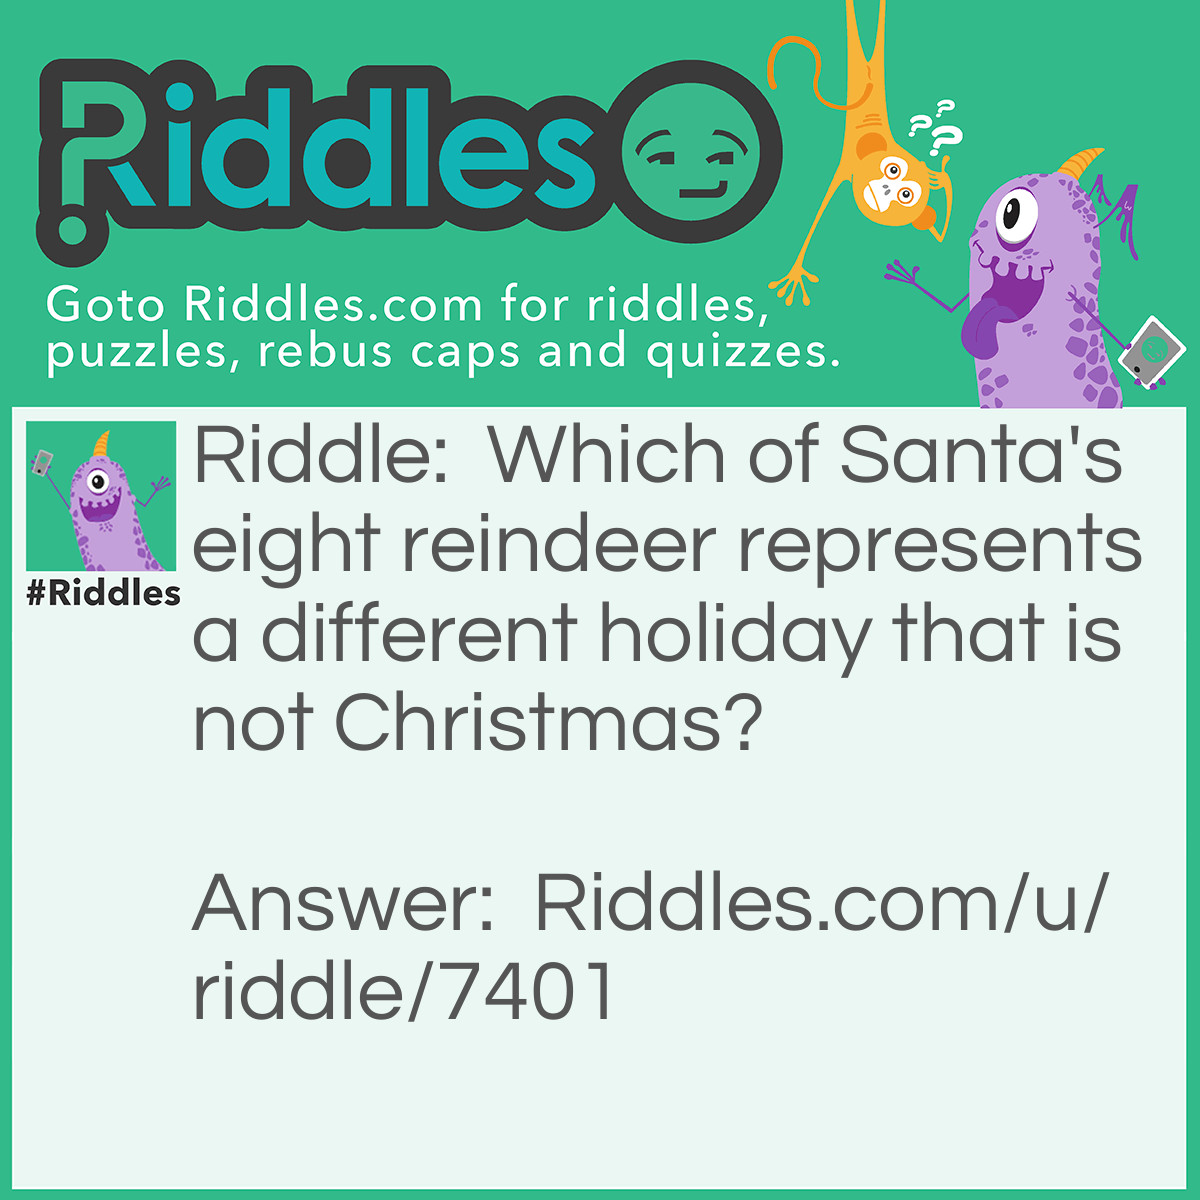 Riddle: Which of Santa's eight reindeer represents a different holiday that is not Christmas? Answer: Cupid - Valentine's Day.